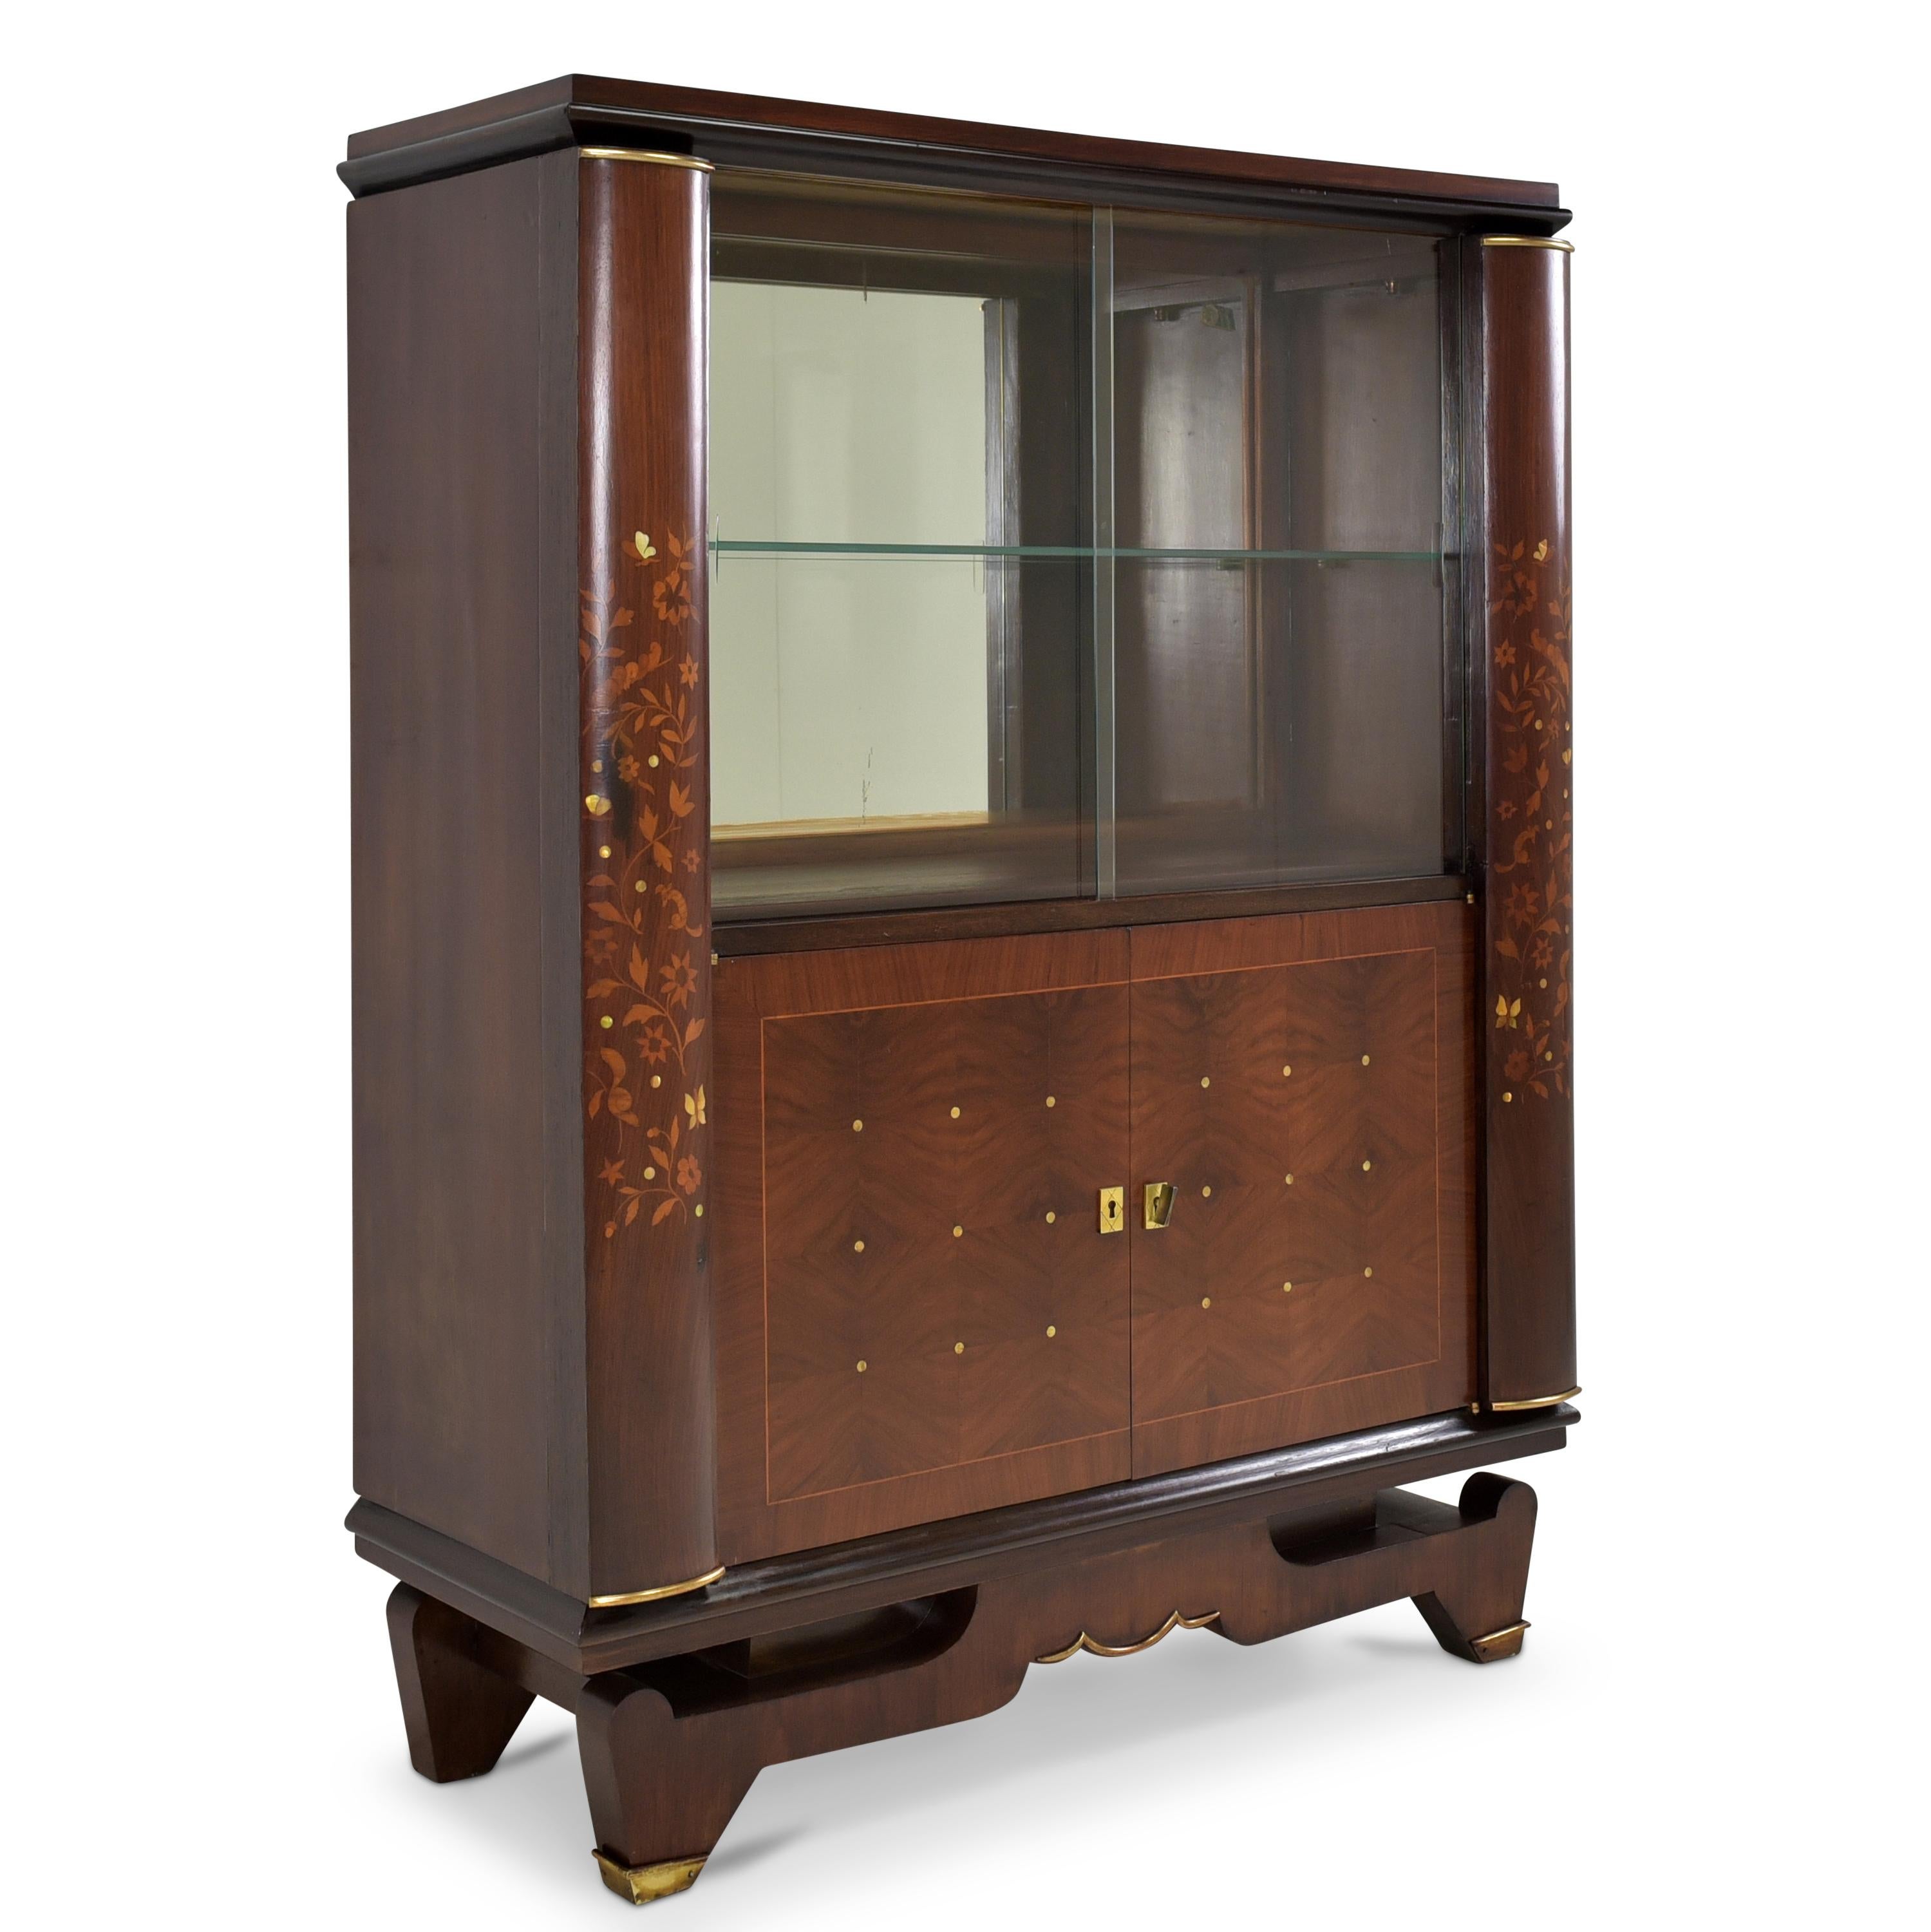 Showcase restored Jules Leleu Art Deco bar cabinet mahogany France

Features:
Sliding door compartment with glass shelf at top, two doors at bottom
Very high quality processing
Elaborate inlaid work with shimmering mother-of-pearl
Original